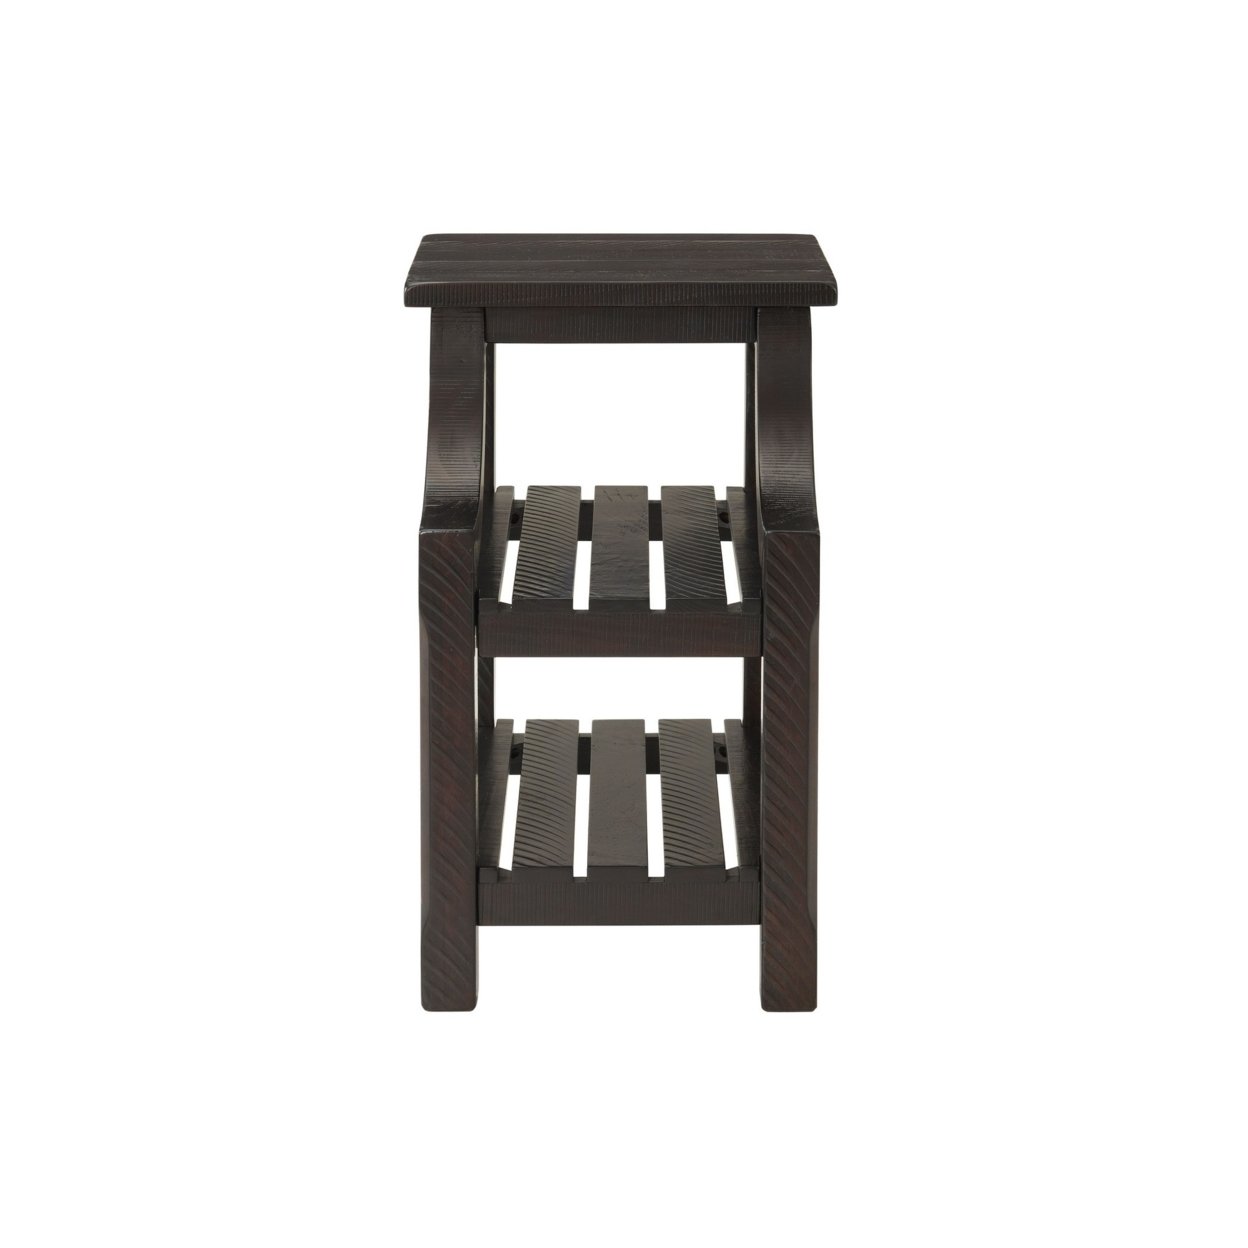 Chairside Table With 2 Slatted Shelves And Chiseled Edges, Brown- Saltoro Sherpi